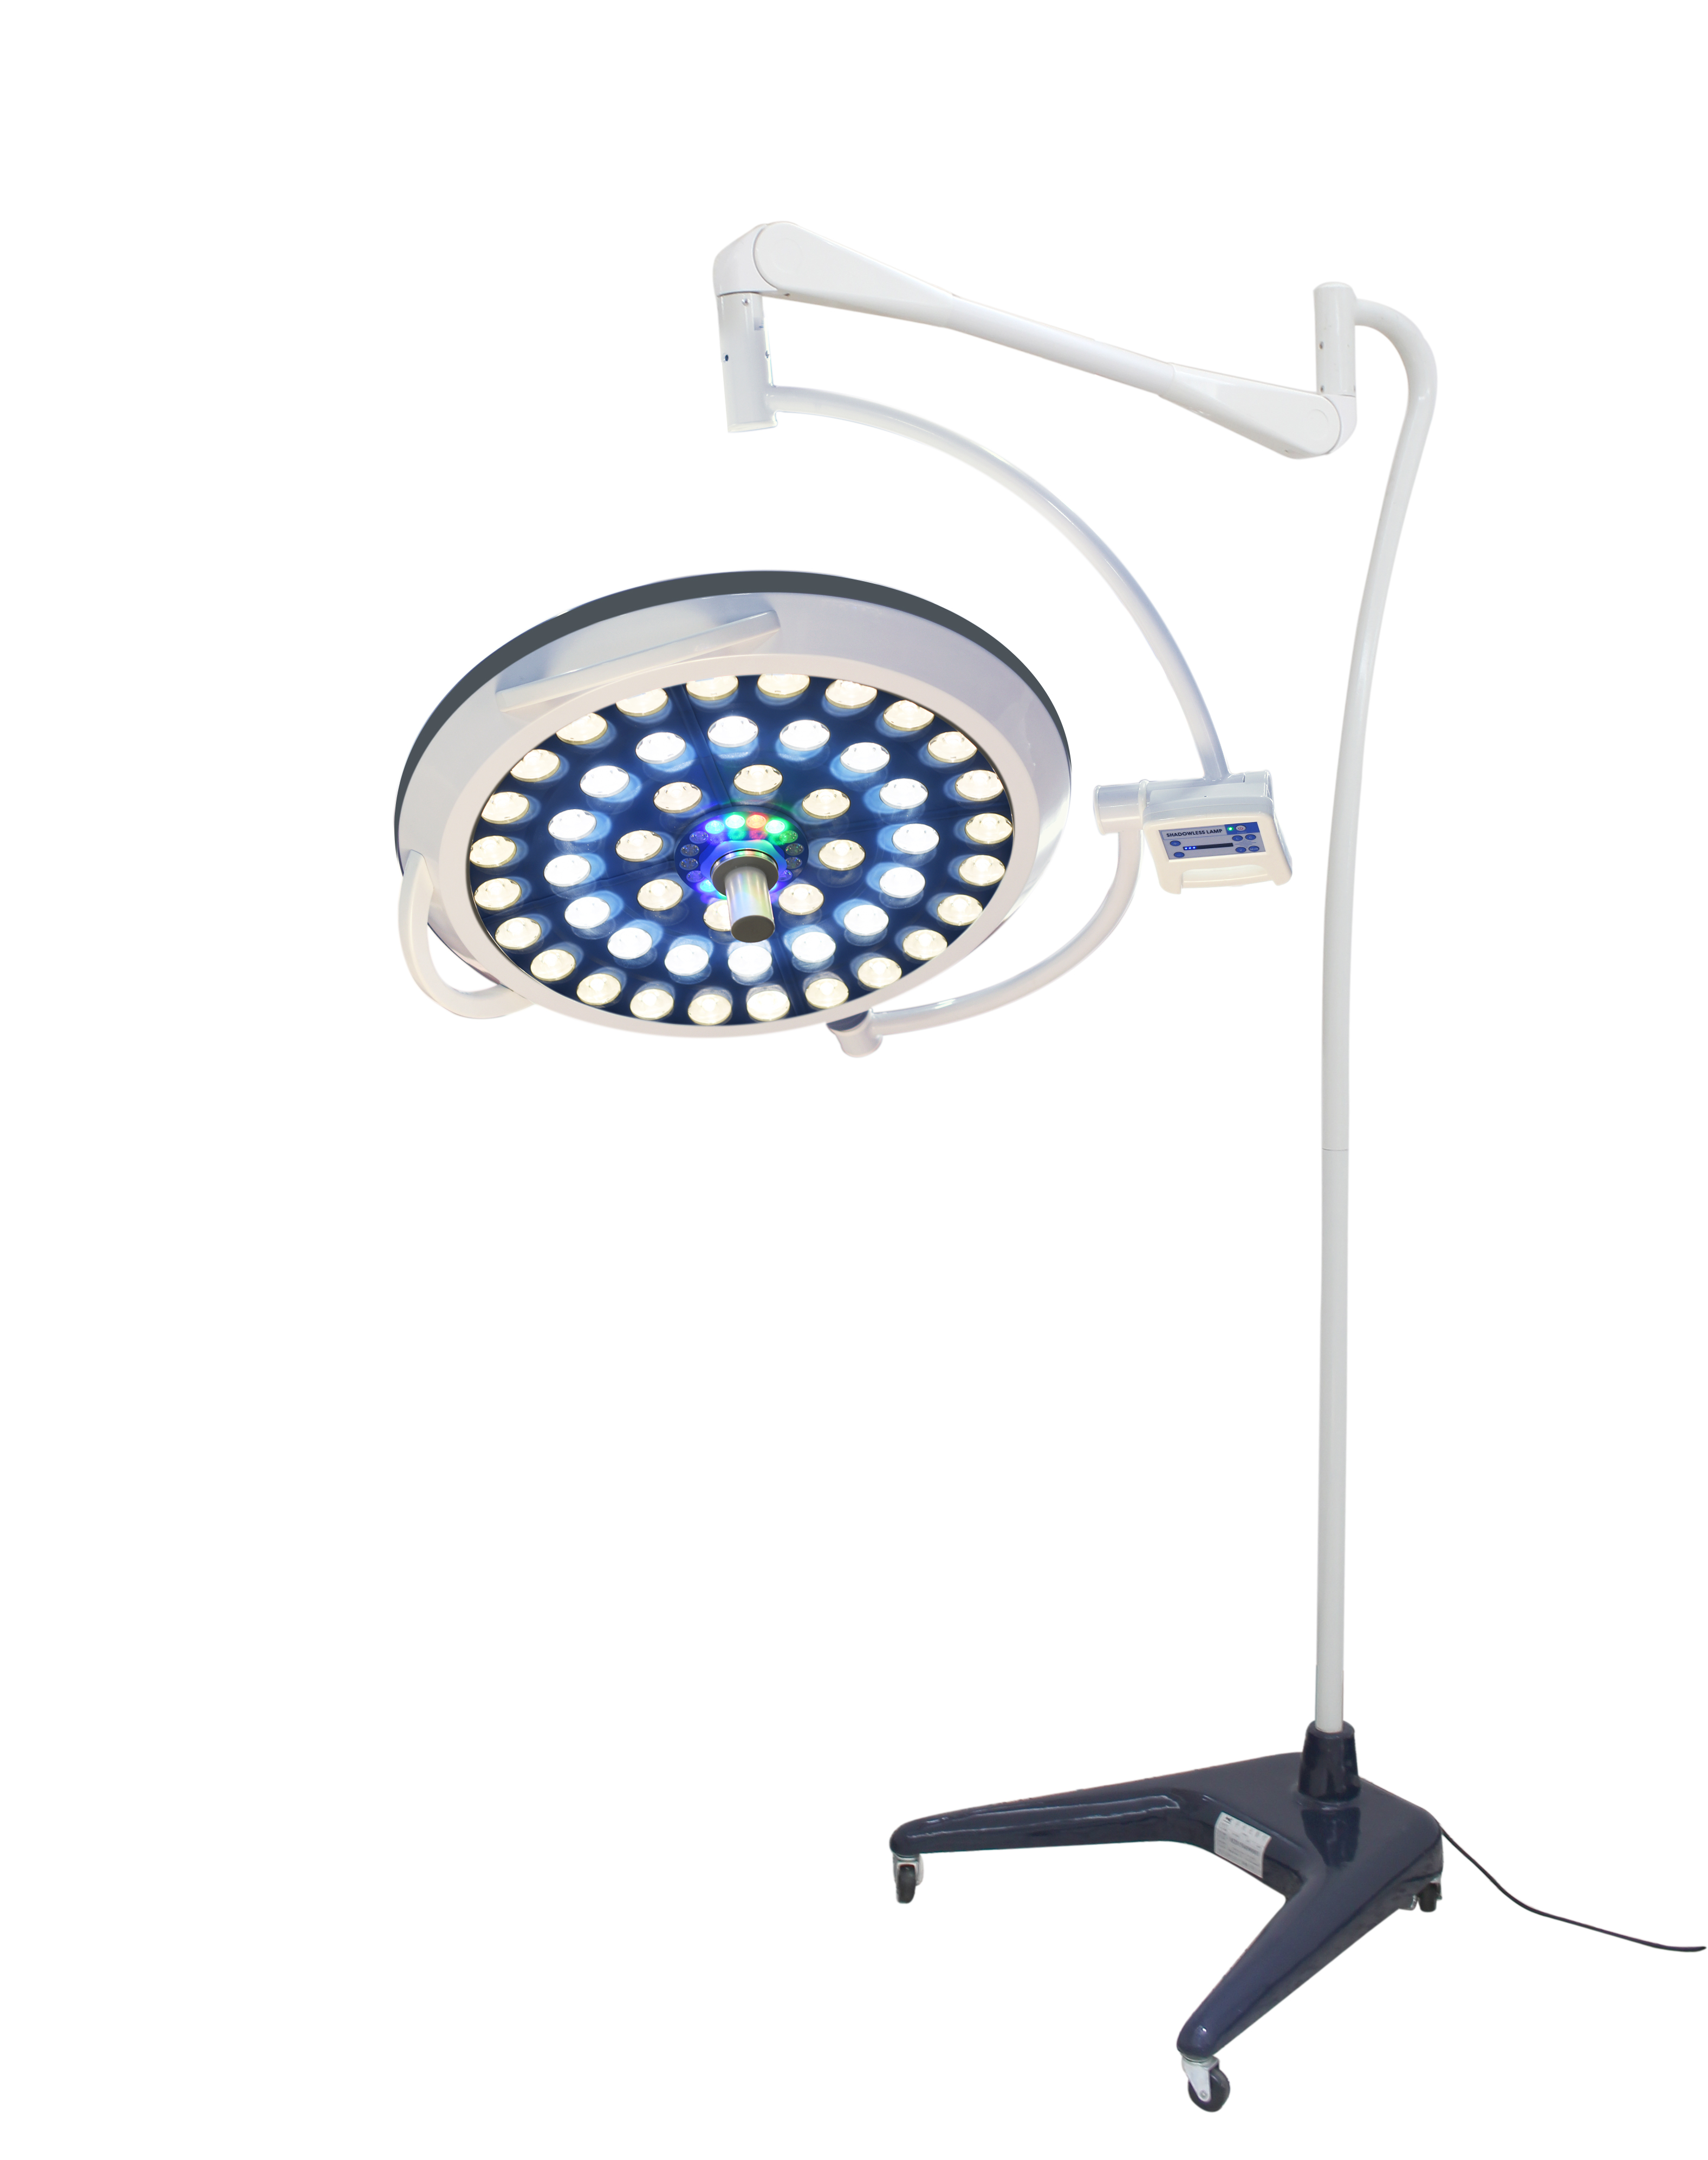 Cheap price Sterilization Light - Medical Surgical Exam Light Mobile Shadowless Lamp Adjustable – Micare